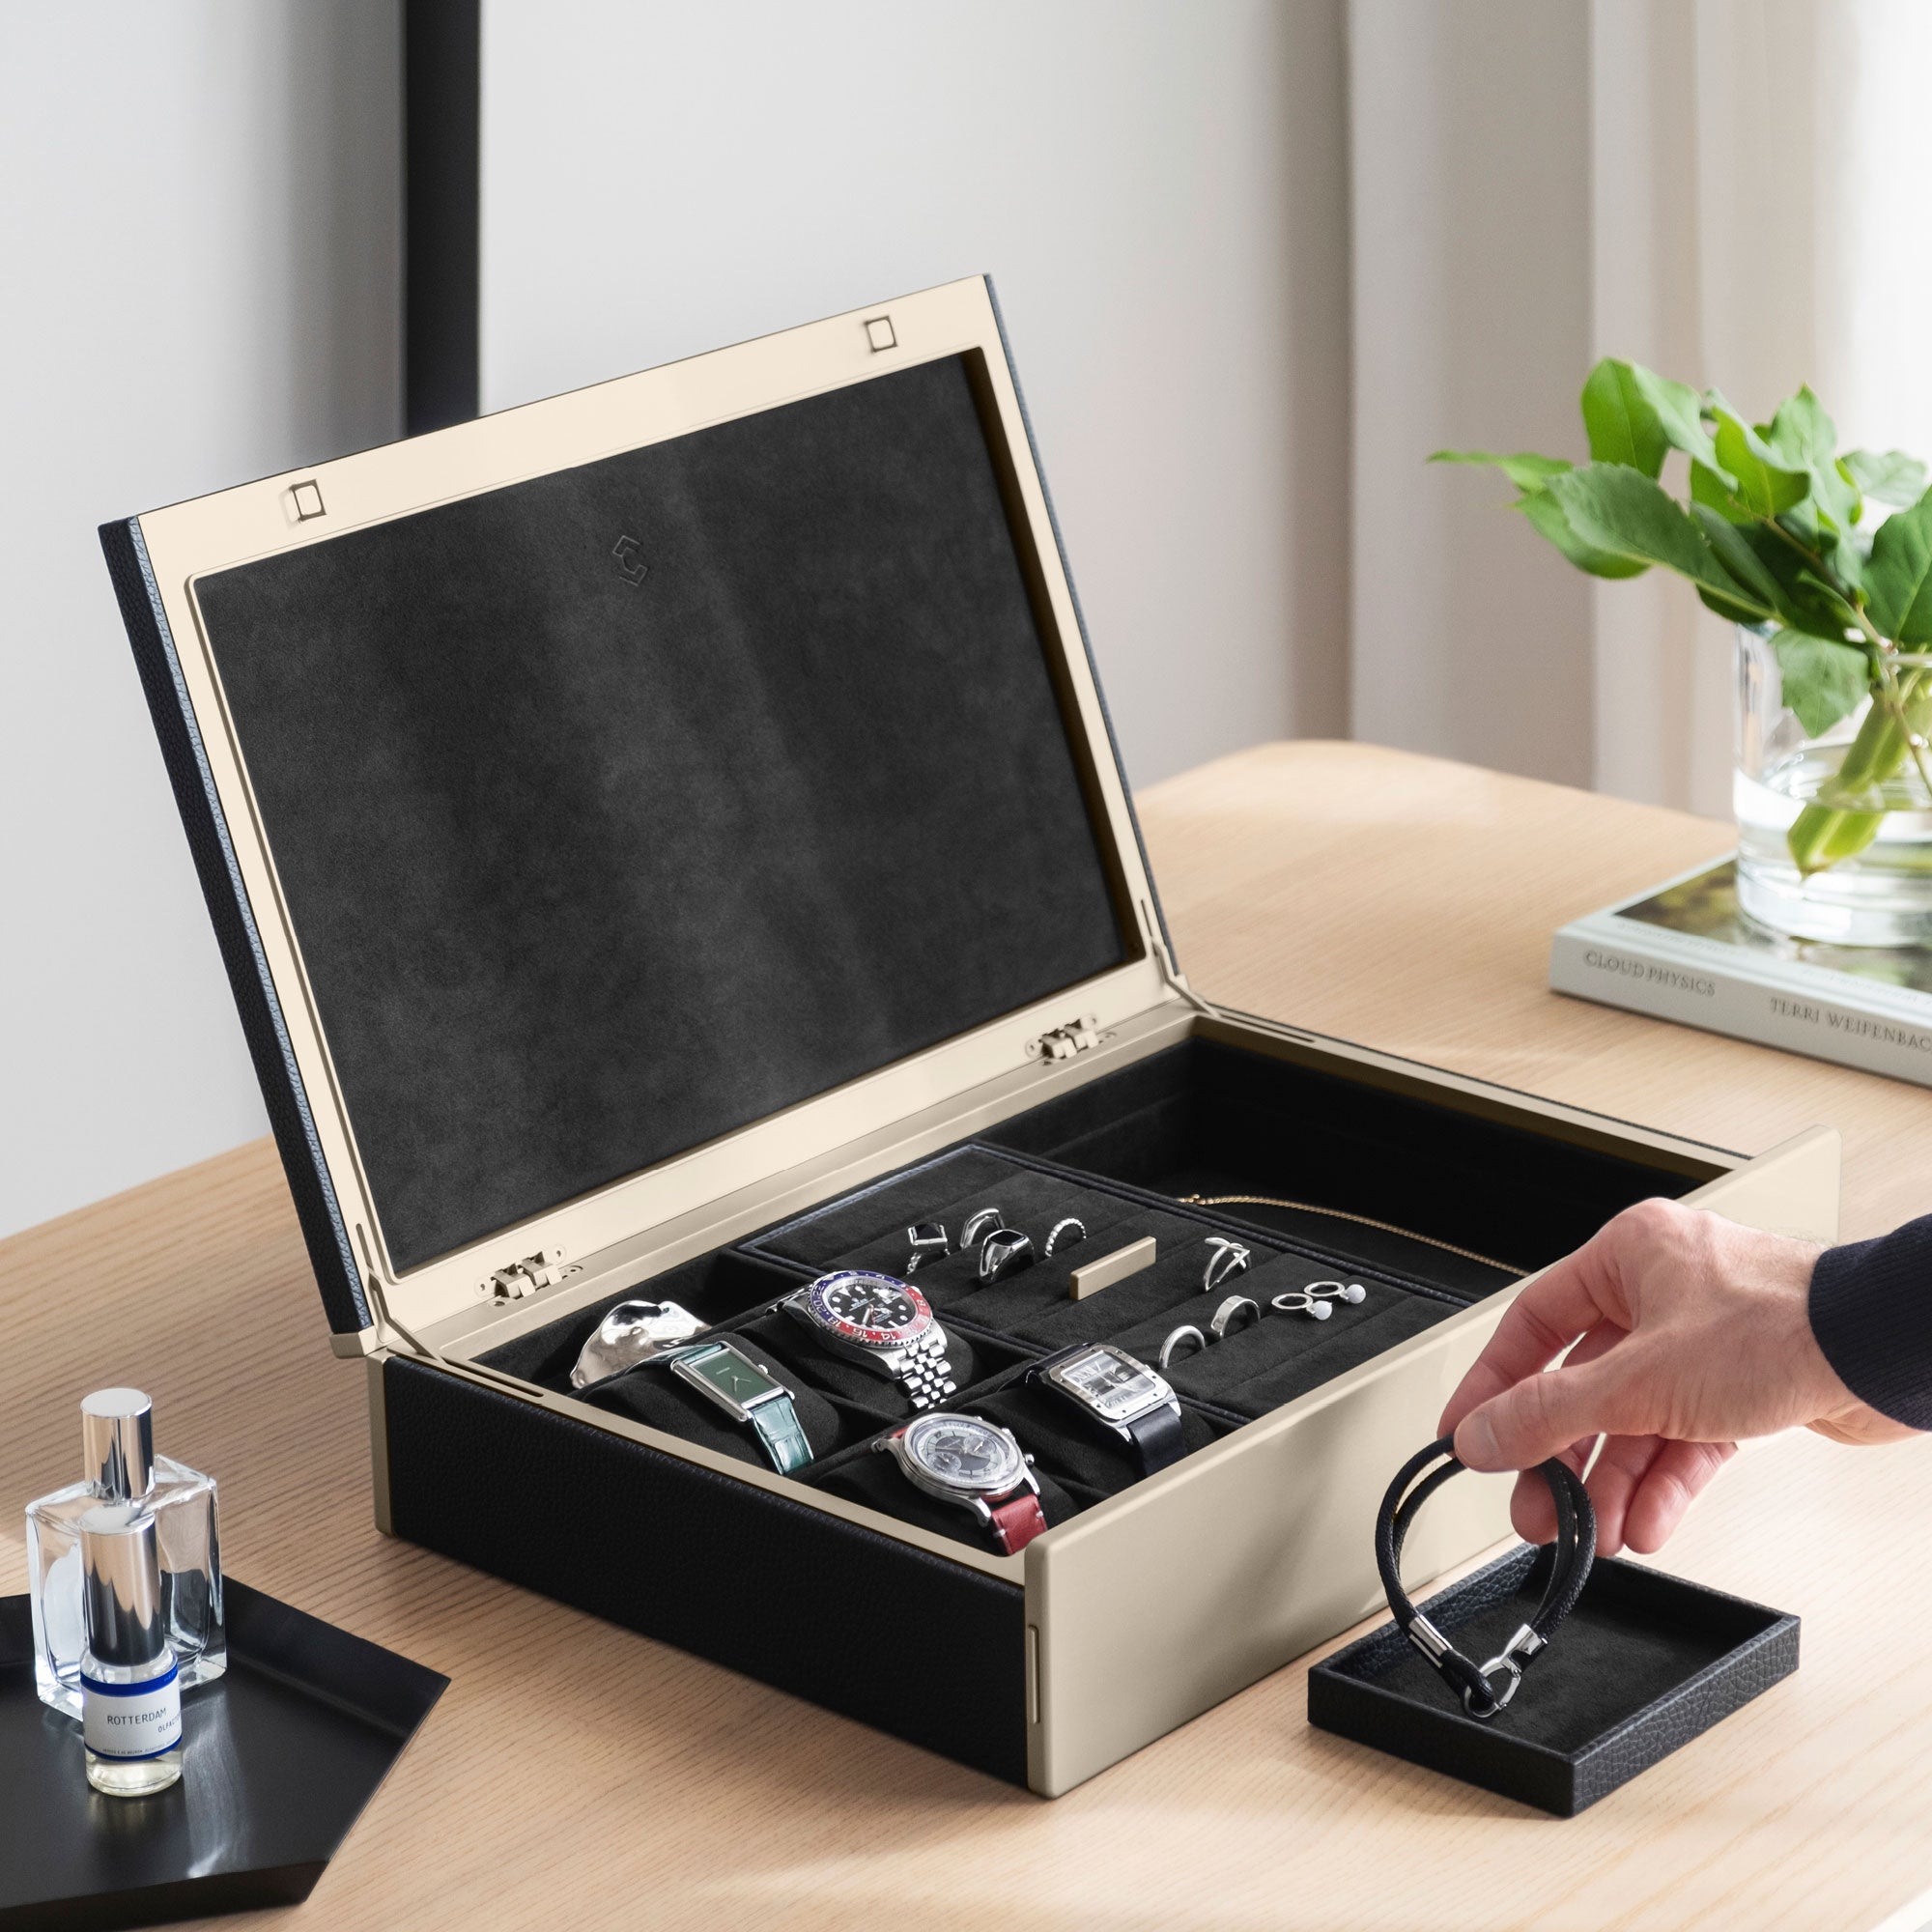 Man taking bracelet from removable jewelry organization tray. The Taylor 4 is also storing 4 luxury timepieces as well as multiple rings and necklaces. 